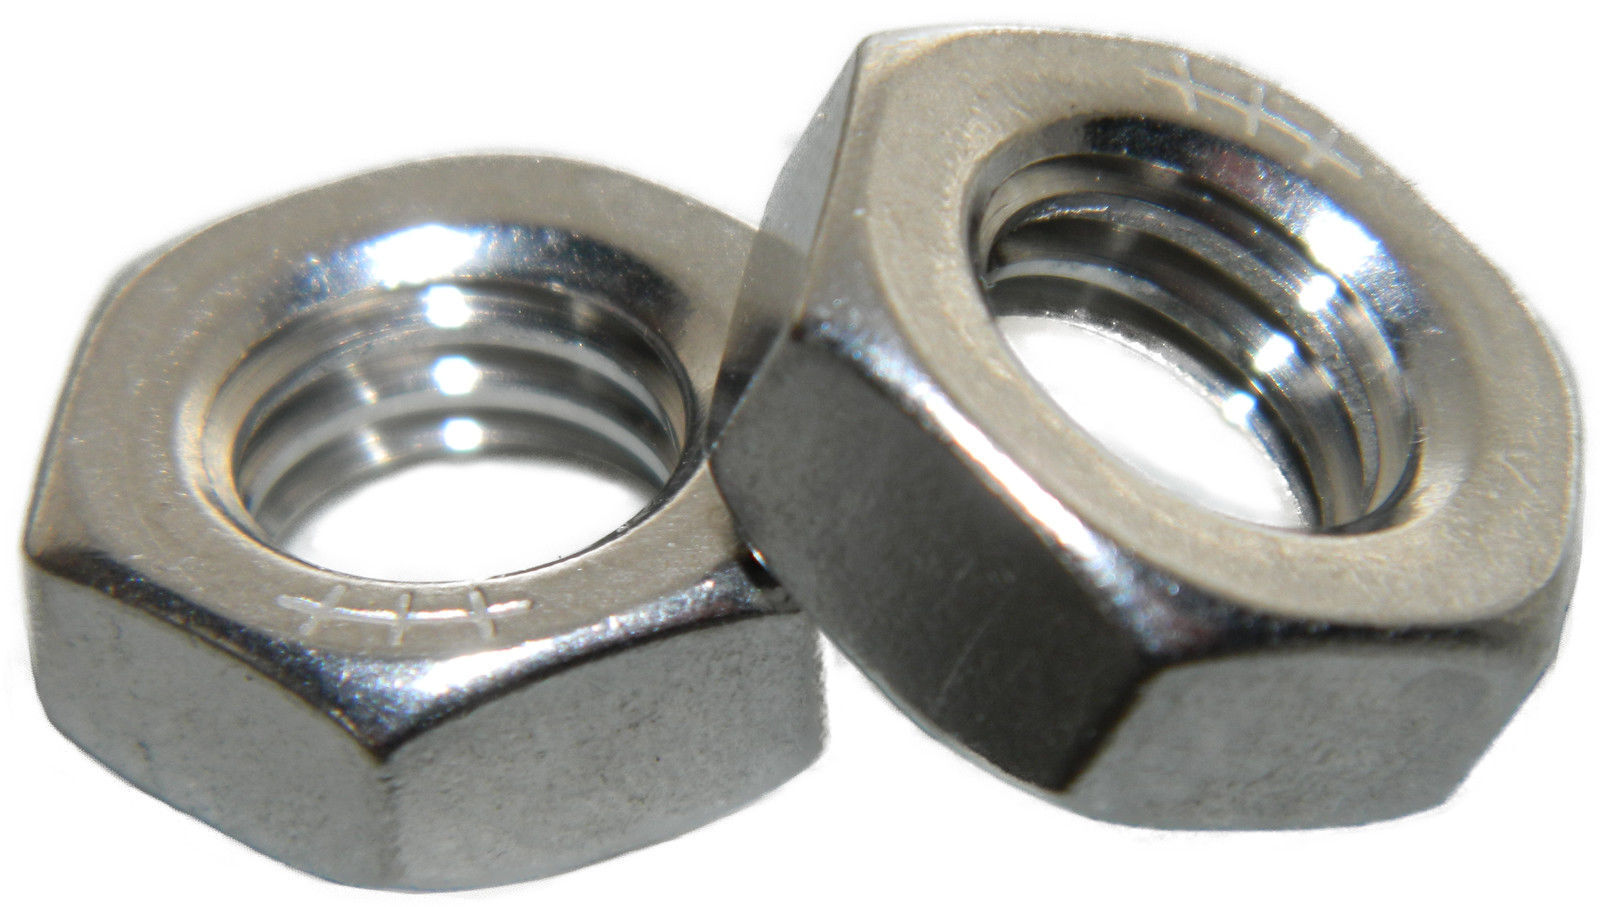 Stainless Steel Fine thread thin jam half height Hex Nuts 5/16-24 Qty 25